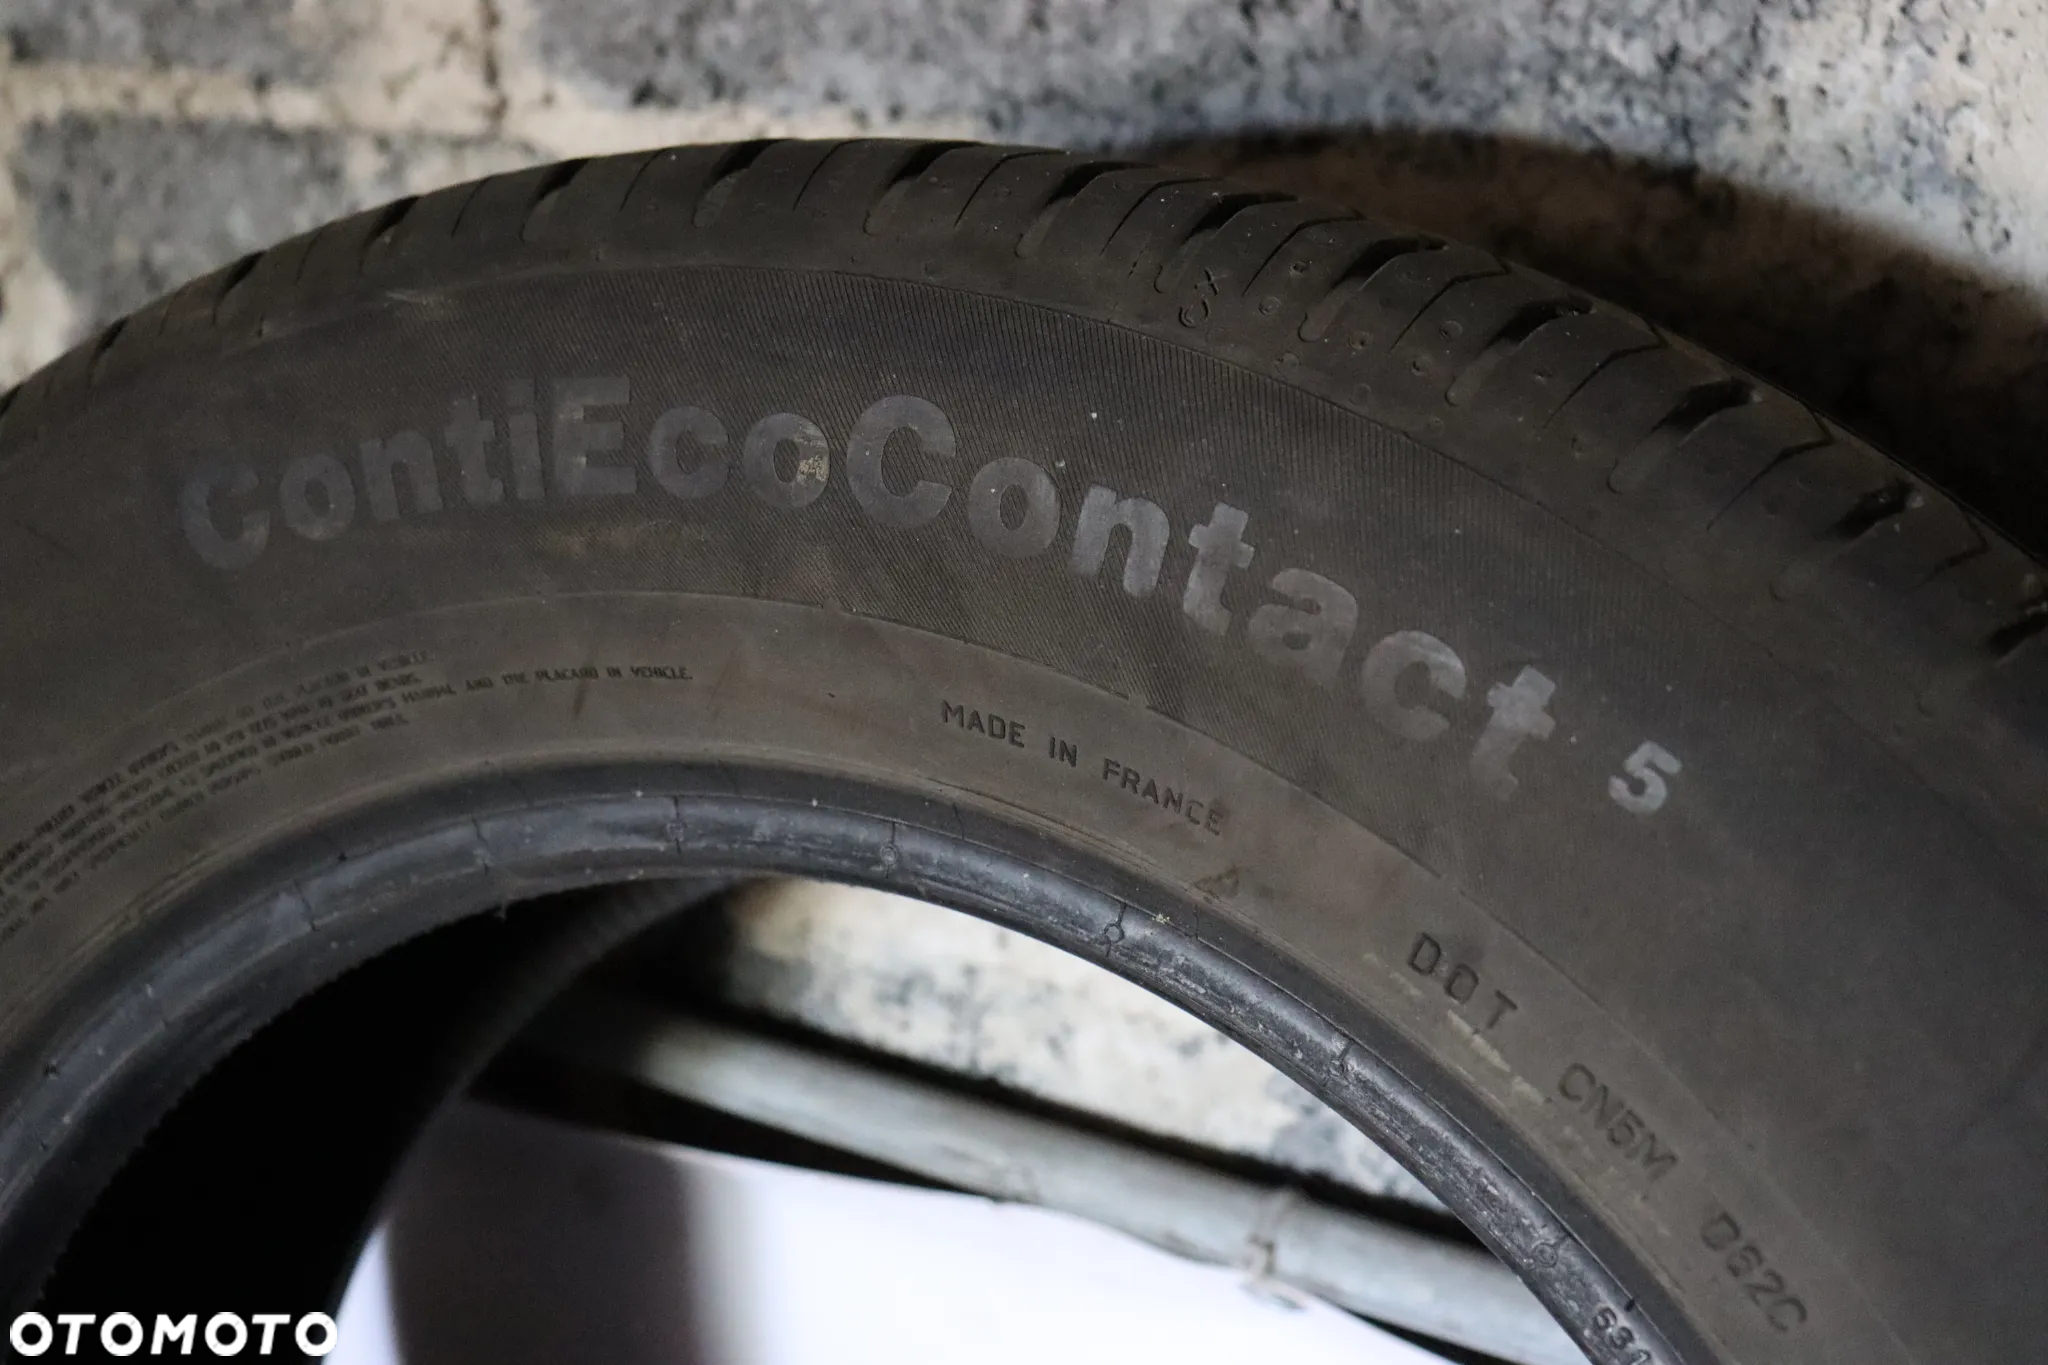 4x 215/60/16 Continental ContiEcoEcontact 5 - 3